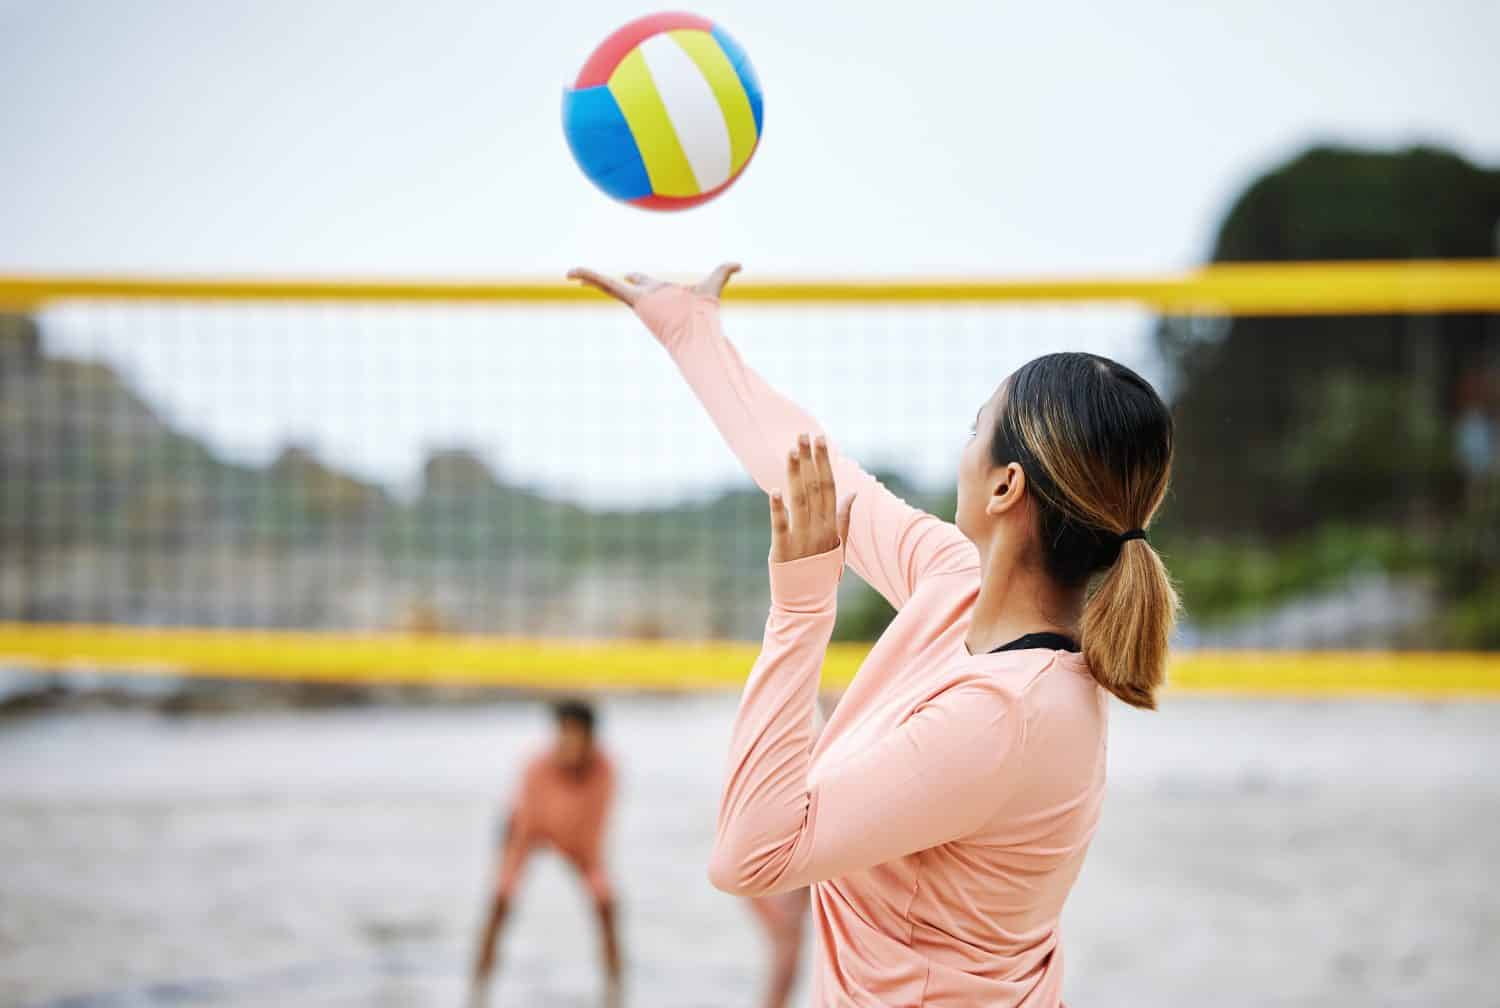 Volleyball, beach or serve of sports women playing a game in training or workout in summer together. Team fitness, freedom or healthy friends on sand ready to start a fun competitive match in Brazil